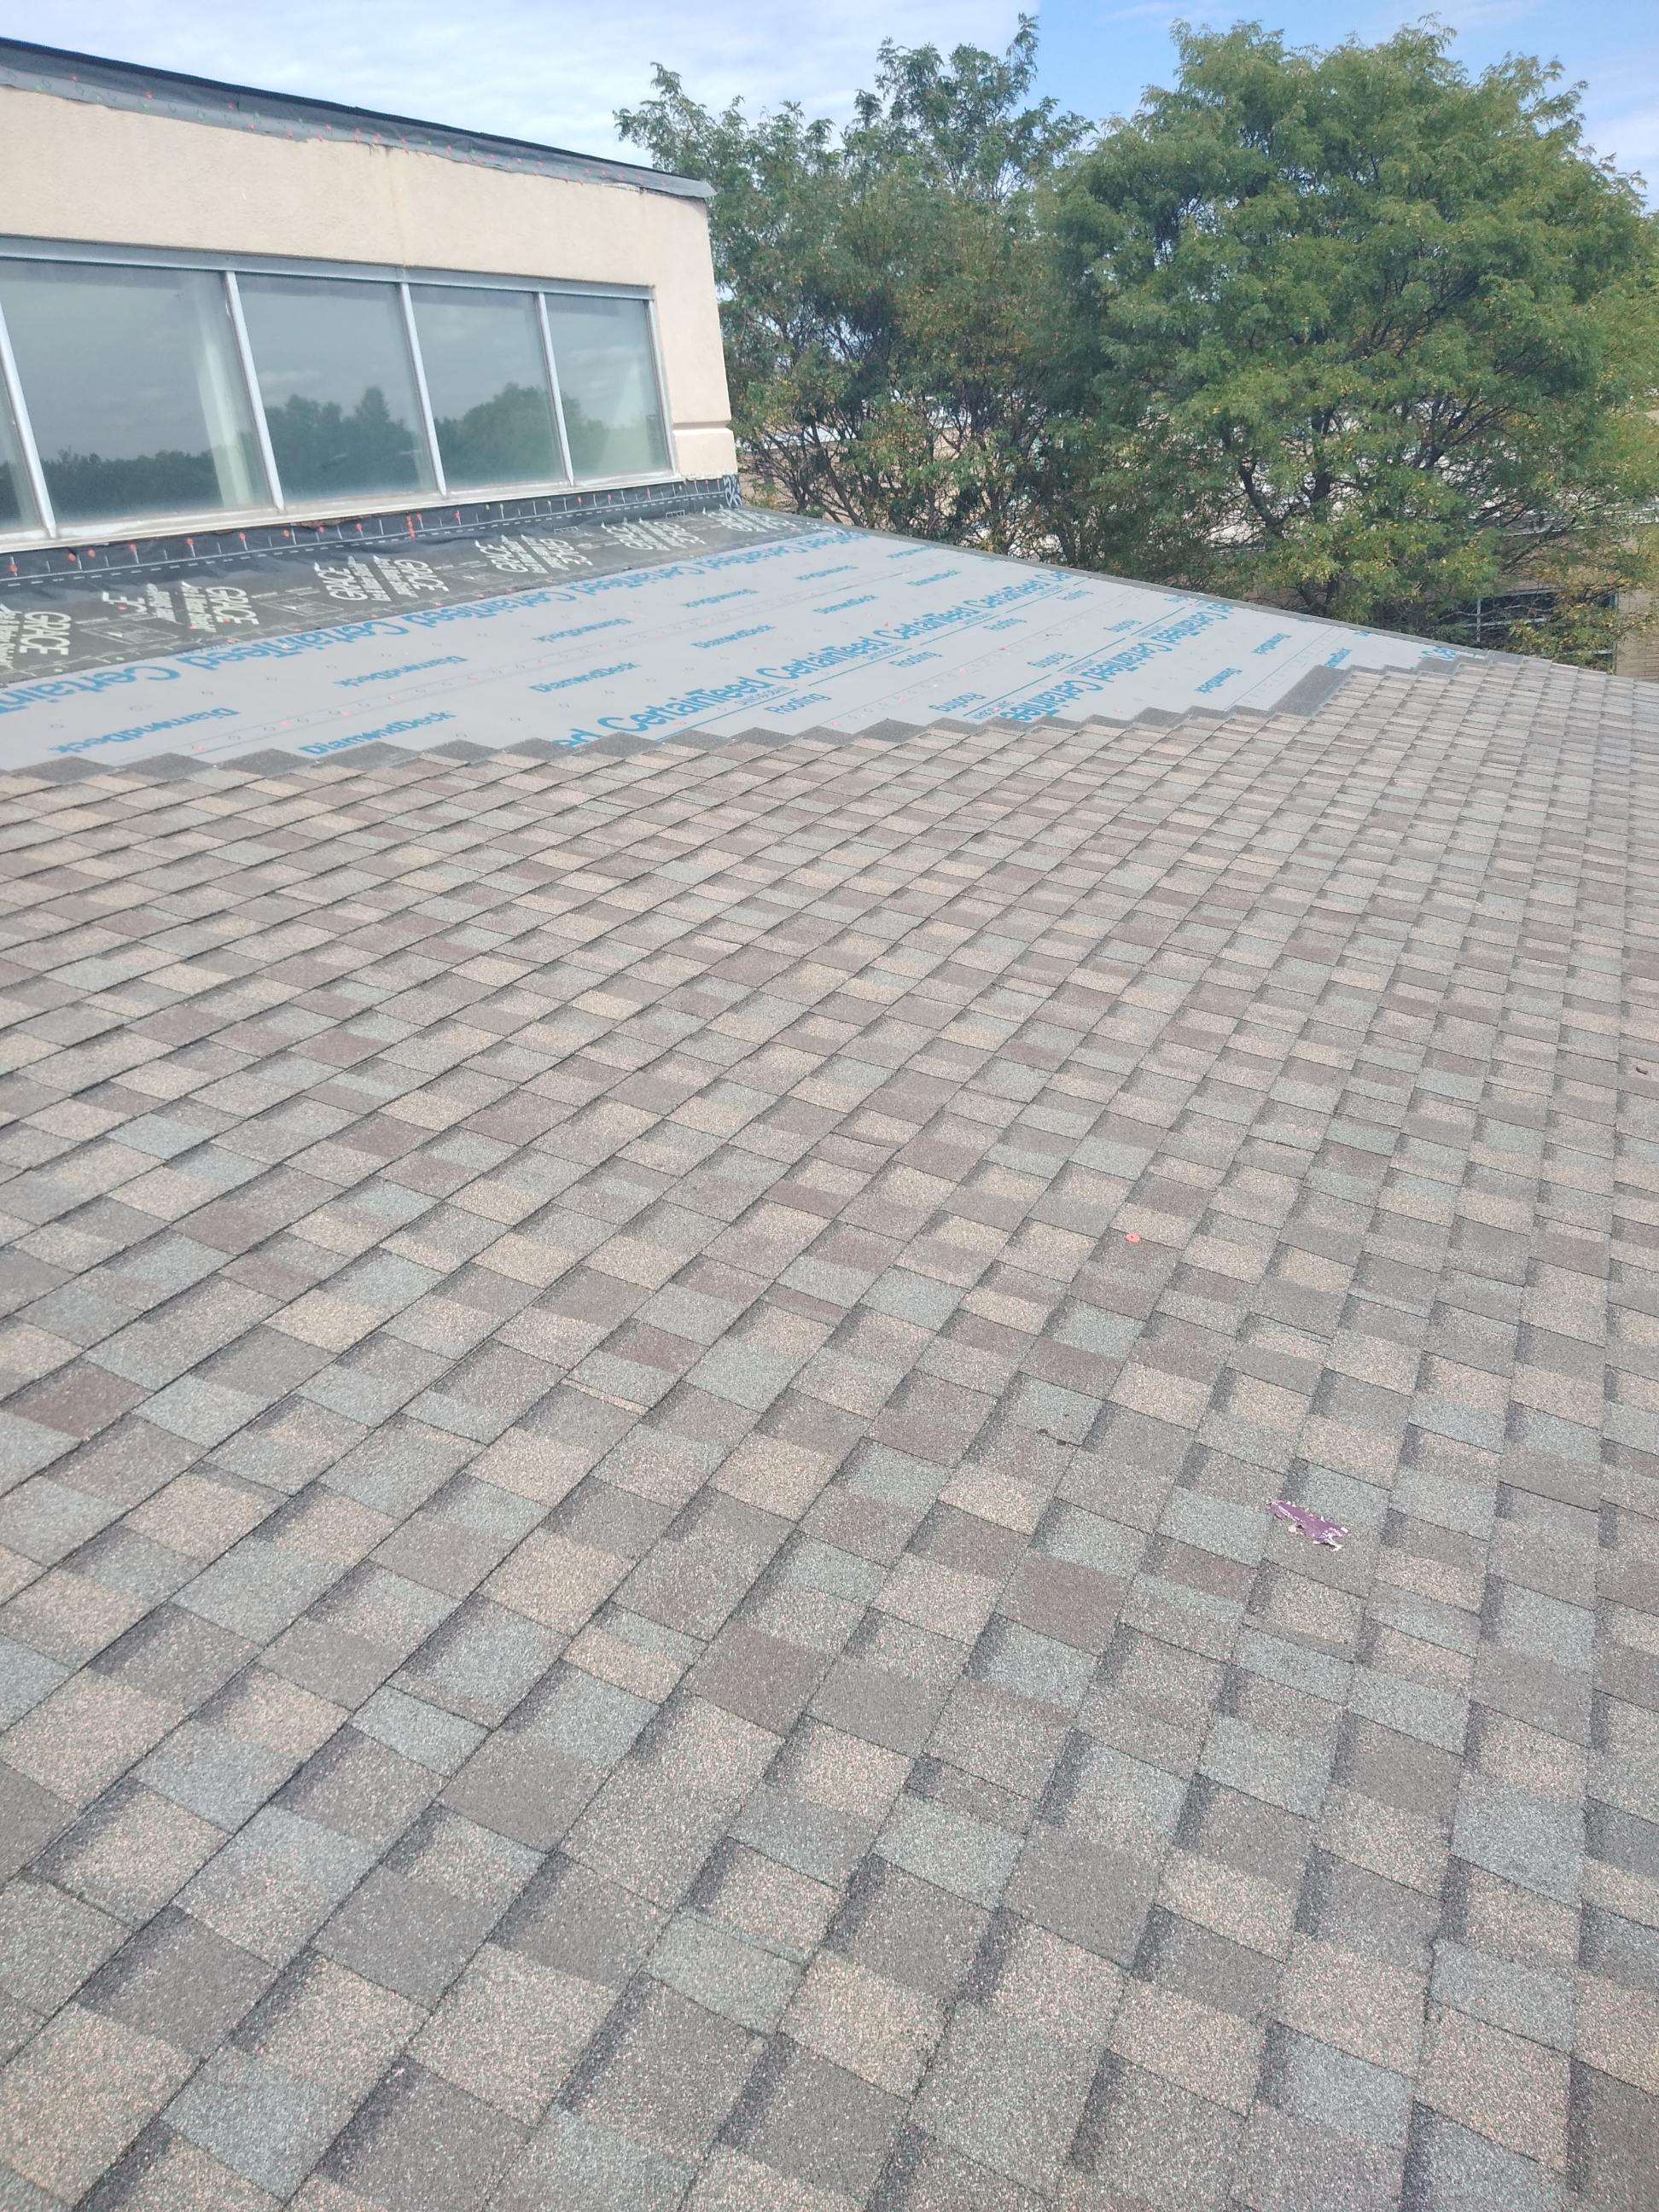 Experienced Commercial Roofers in Cleveland, Ohio